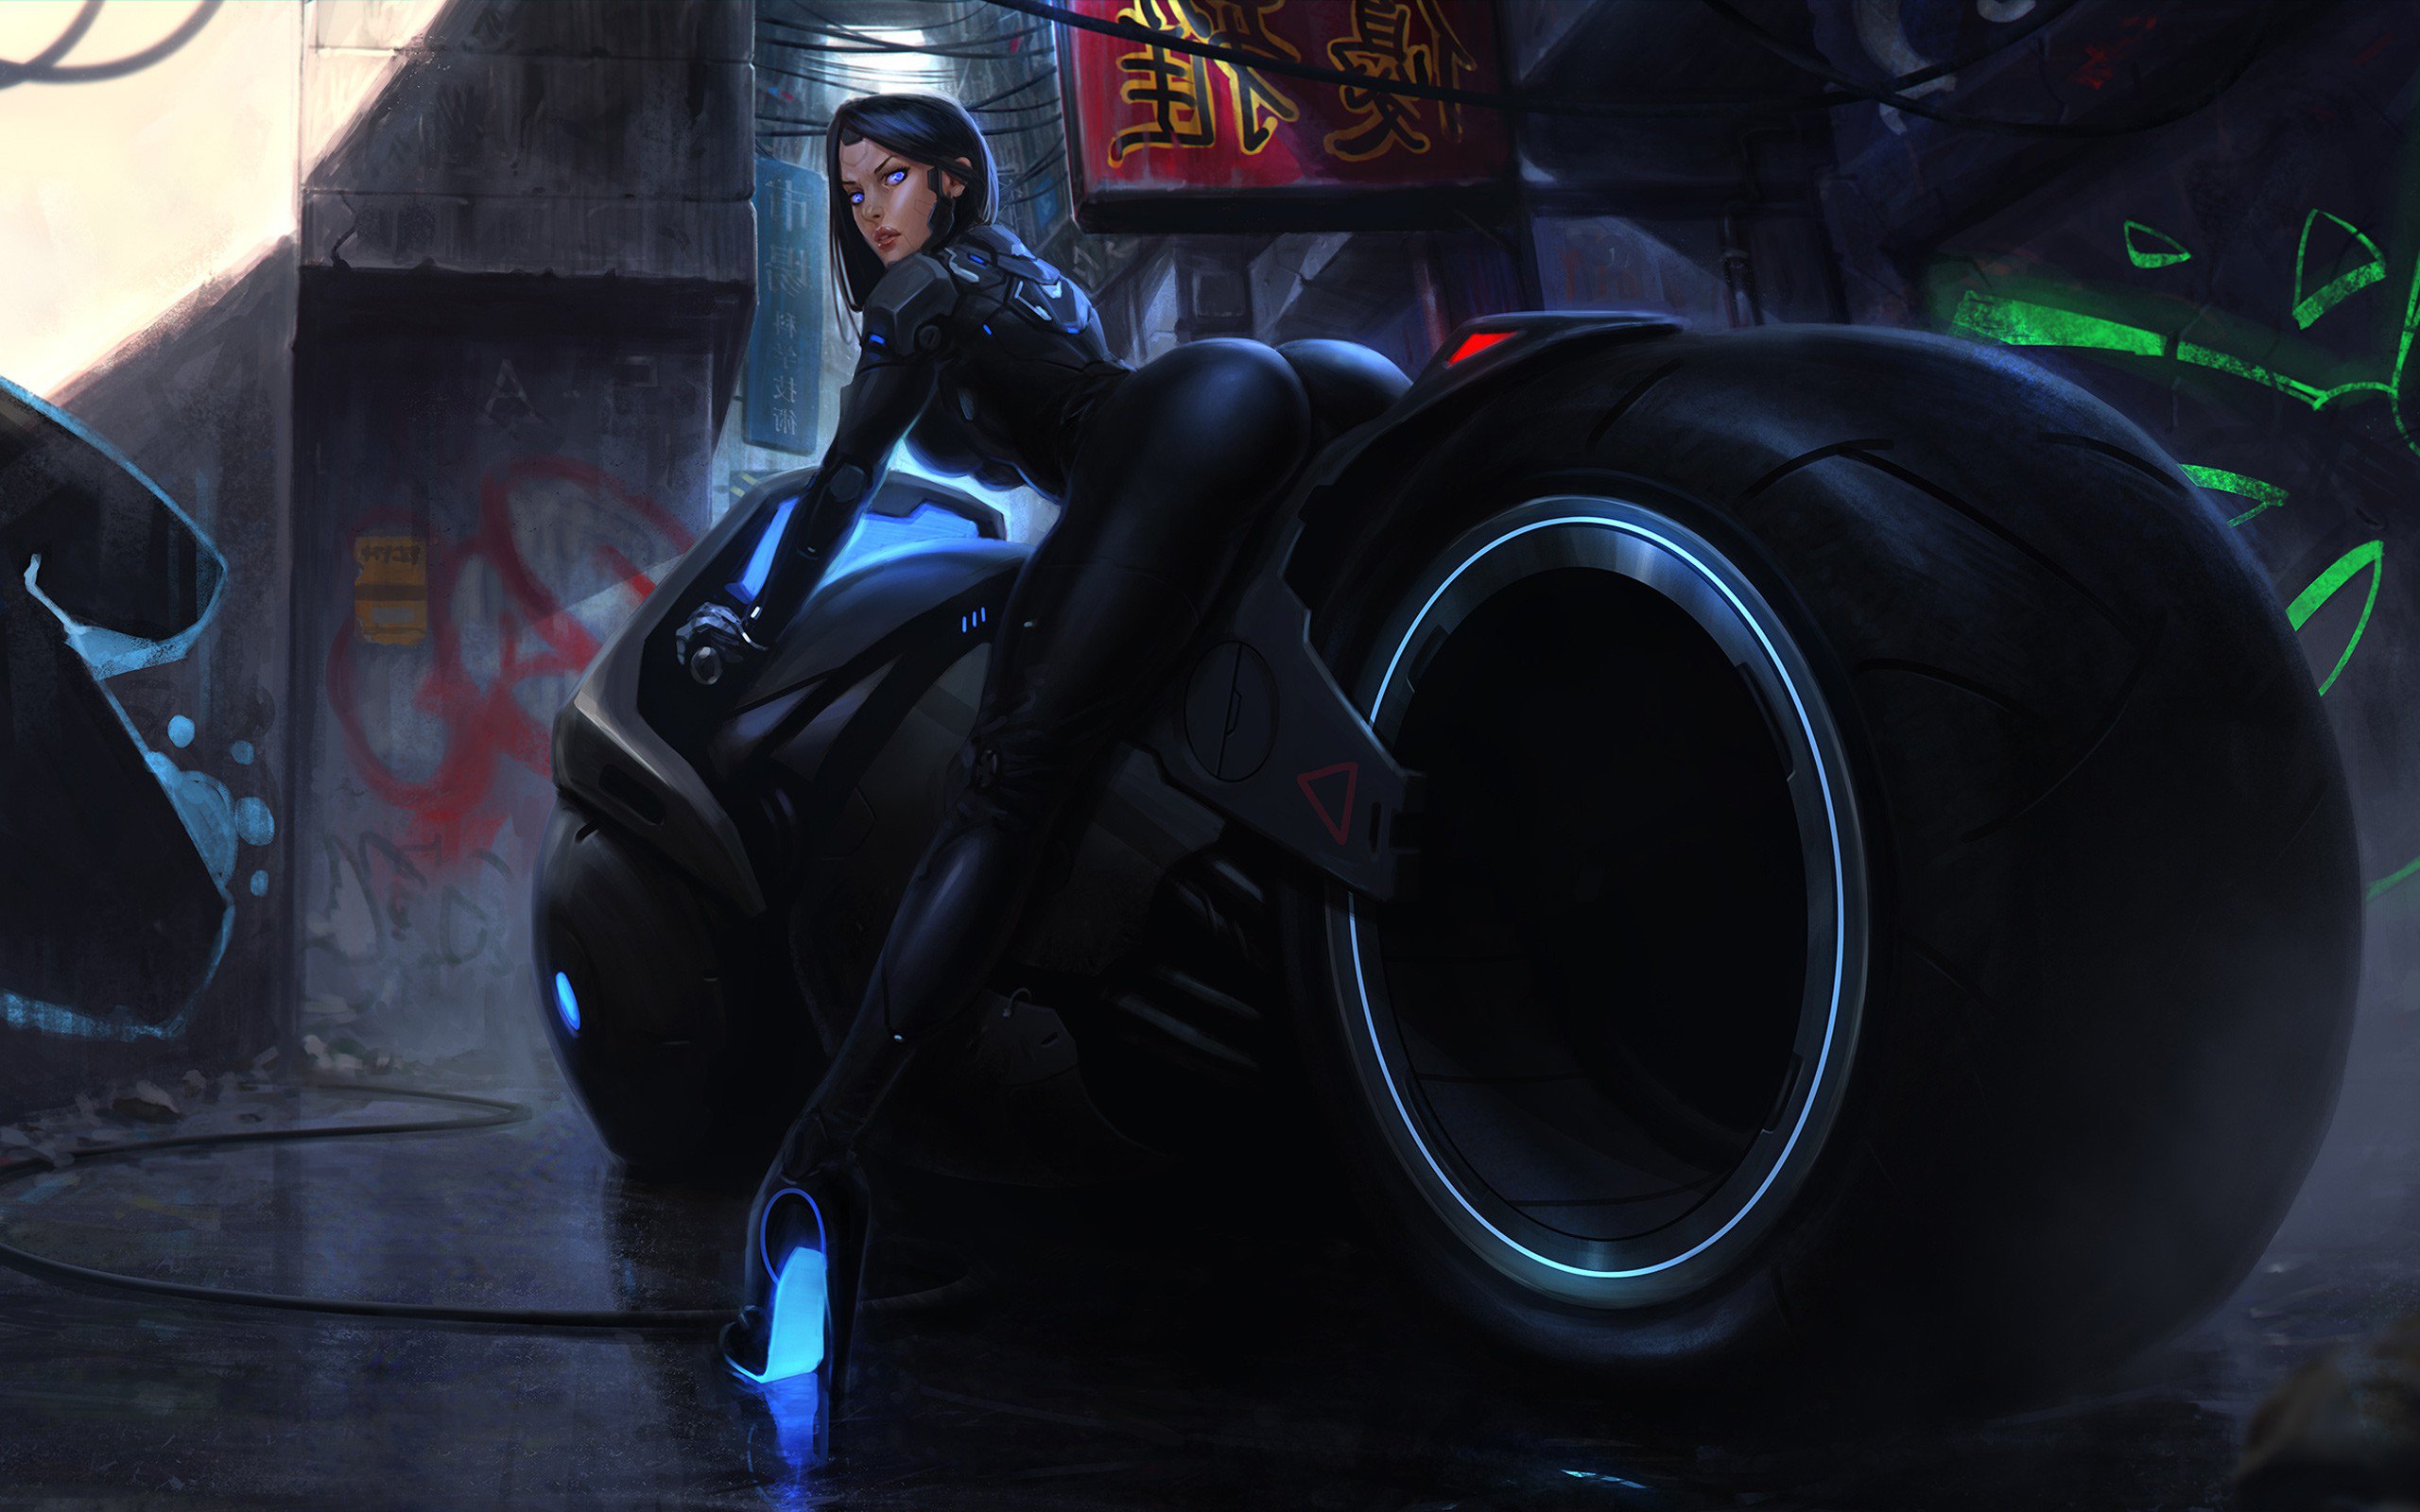 Tron Bike Anime Girl Hd Anime K Wallpapers Images 12789 Hot Sex Picture